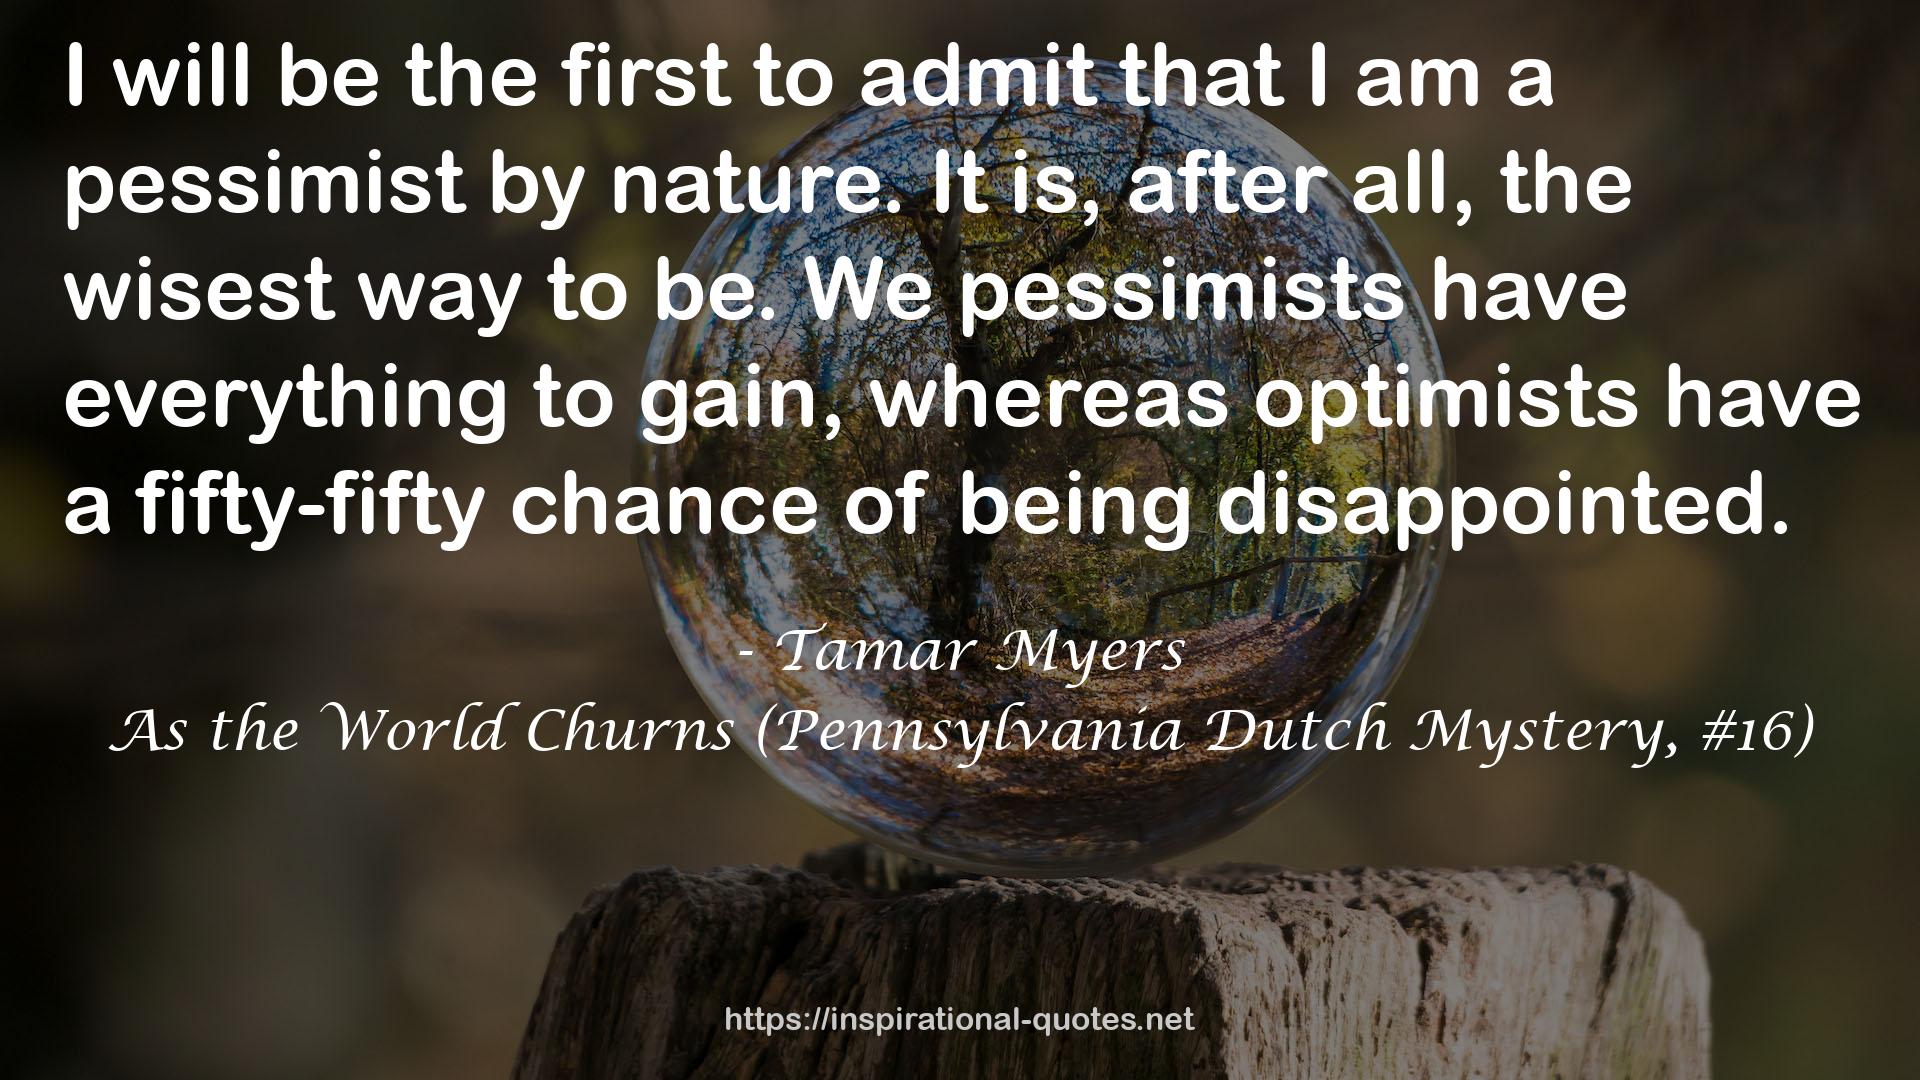 Tamar Myers QUOTES